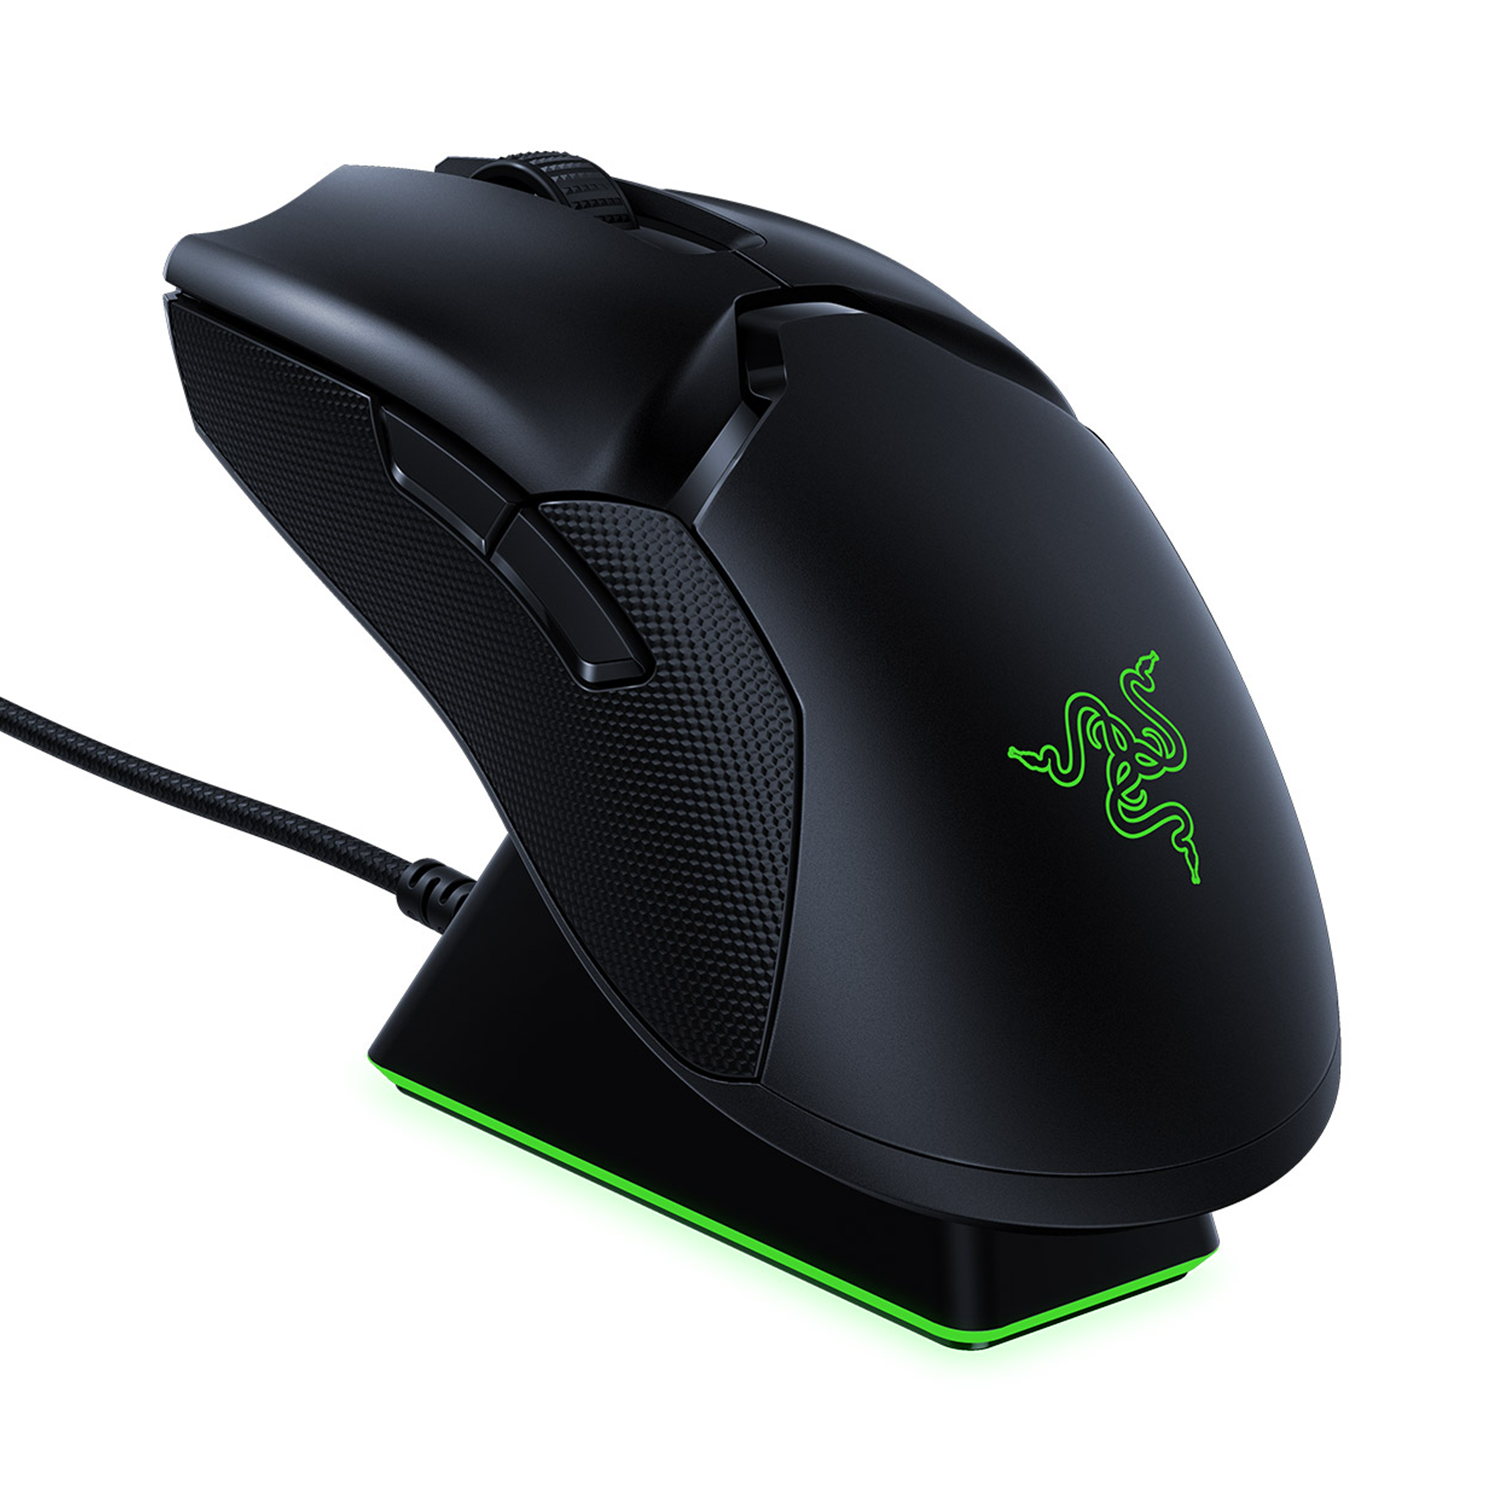 Razer Viper Ultimate Lightweight Wireless Gaming Mouse & RGB Charging Dock: Fastest Gaming Switches - 20K DPI Optical Sensor - Chroma Lighting - 8 Programmable Buttons - 70 Hr Battery - Classic Black - image 1 of 7